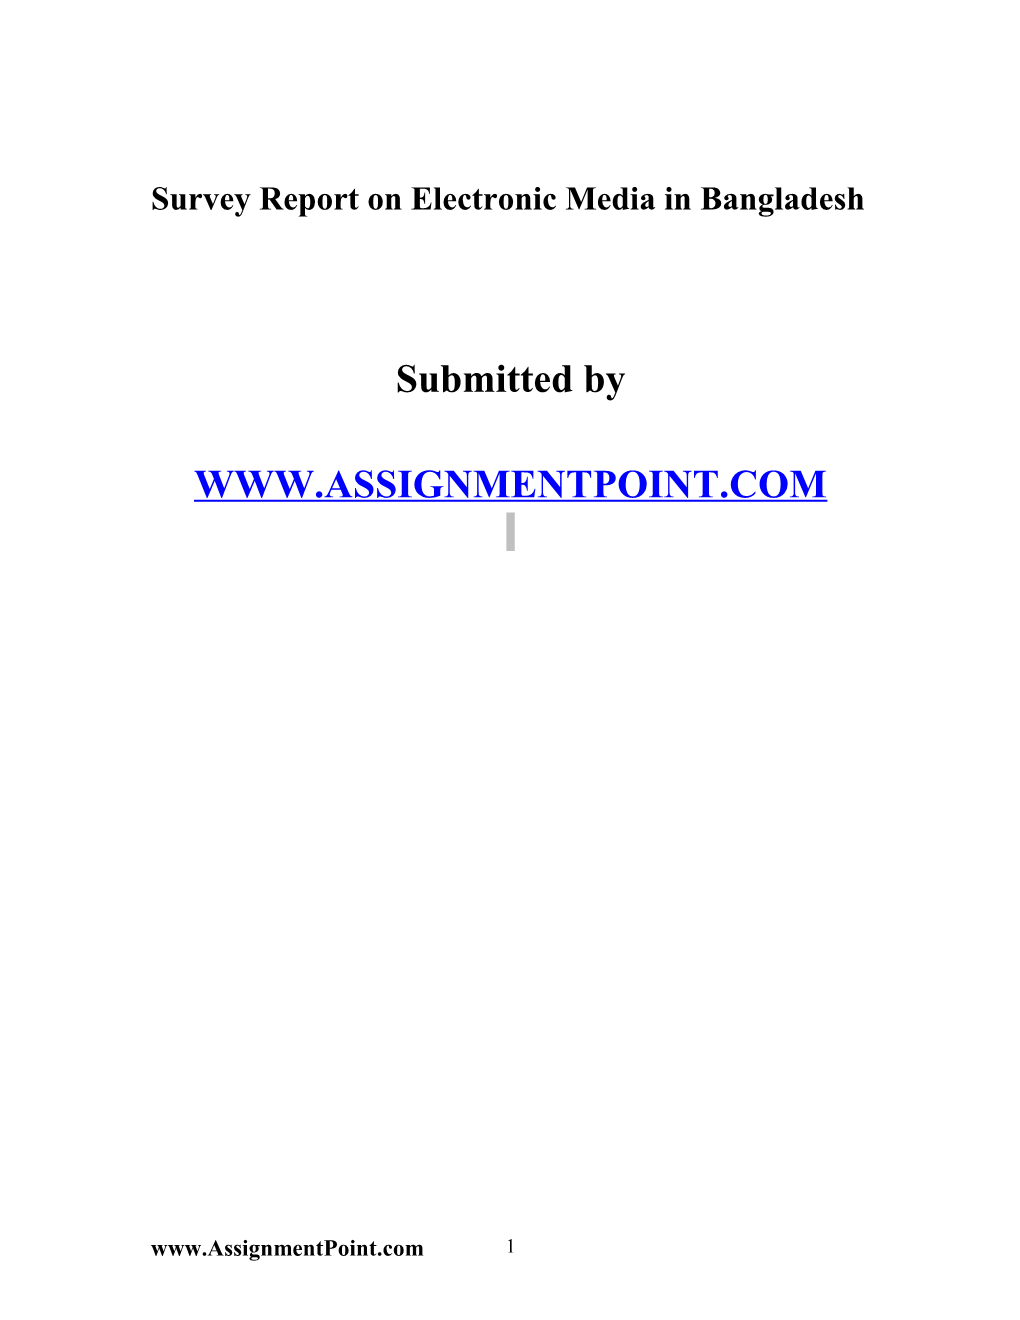 Survey Report on Electronic Media in Bangladesh